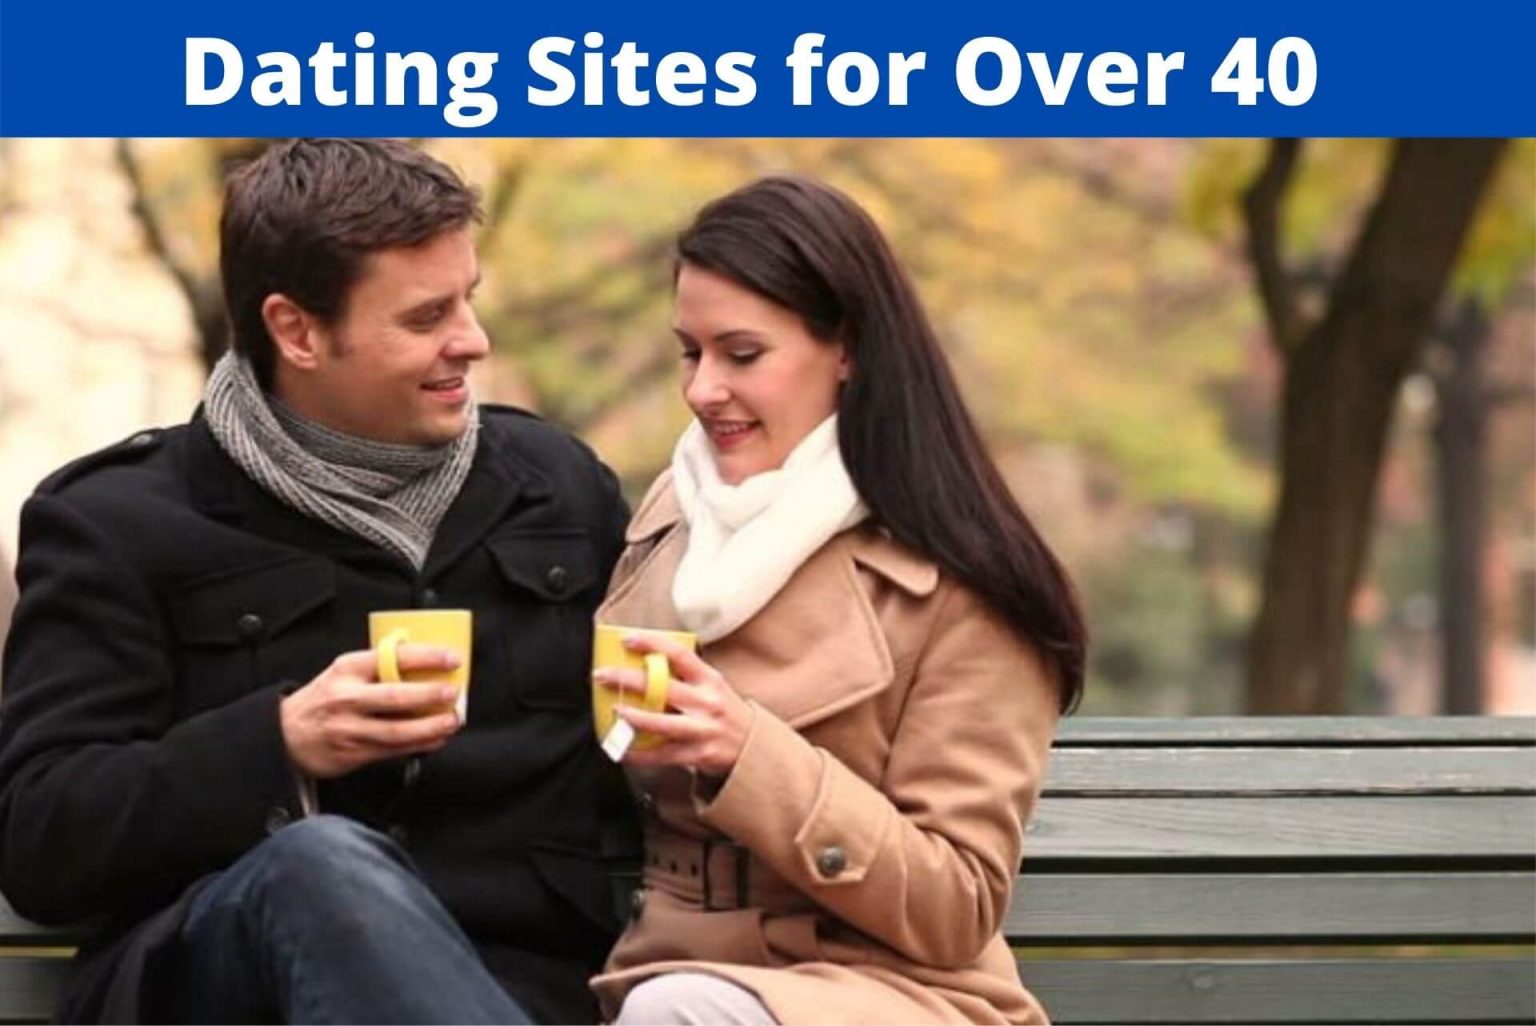 Top 7 Dating Sites For Over 40 – Senior Dating Sites For 40+